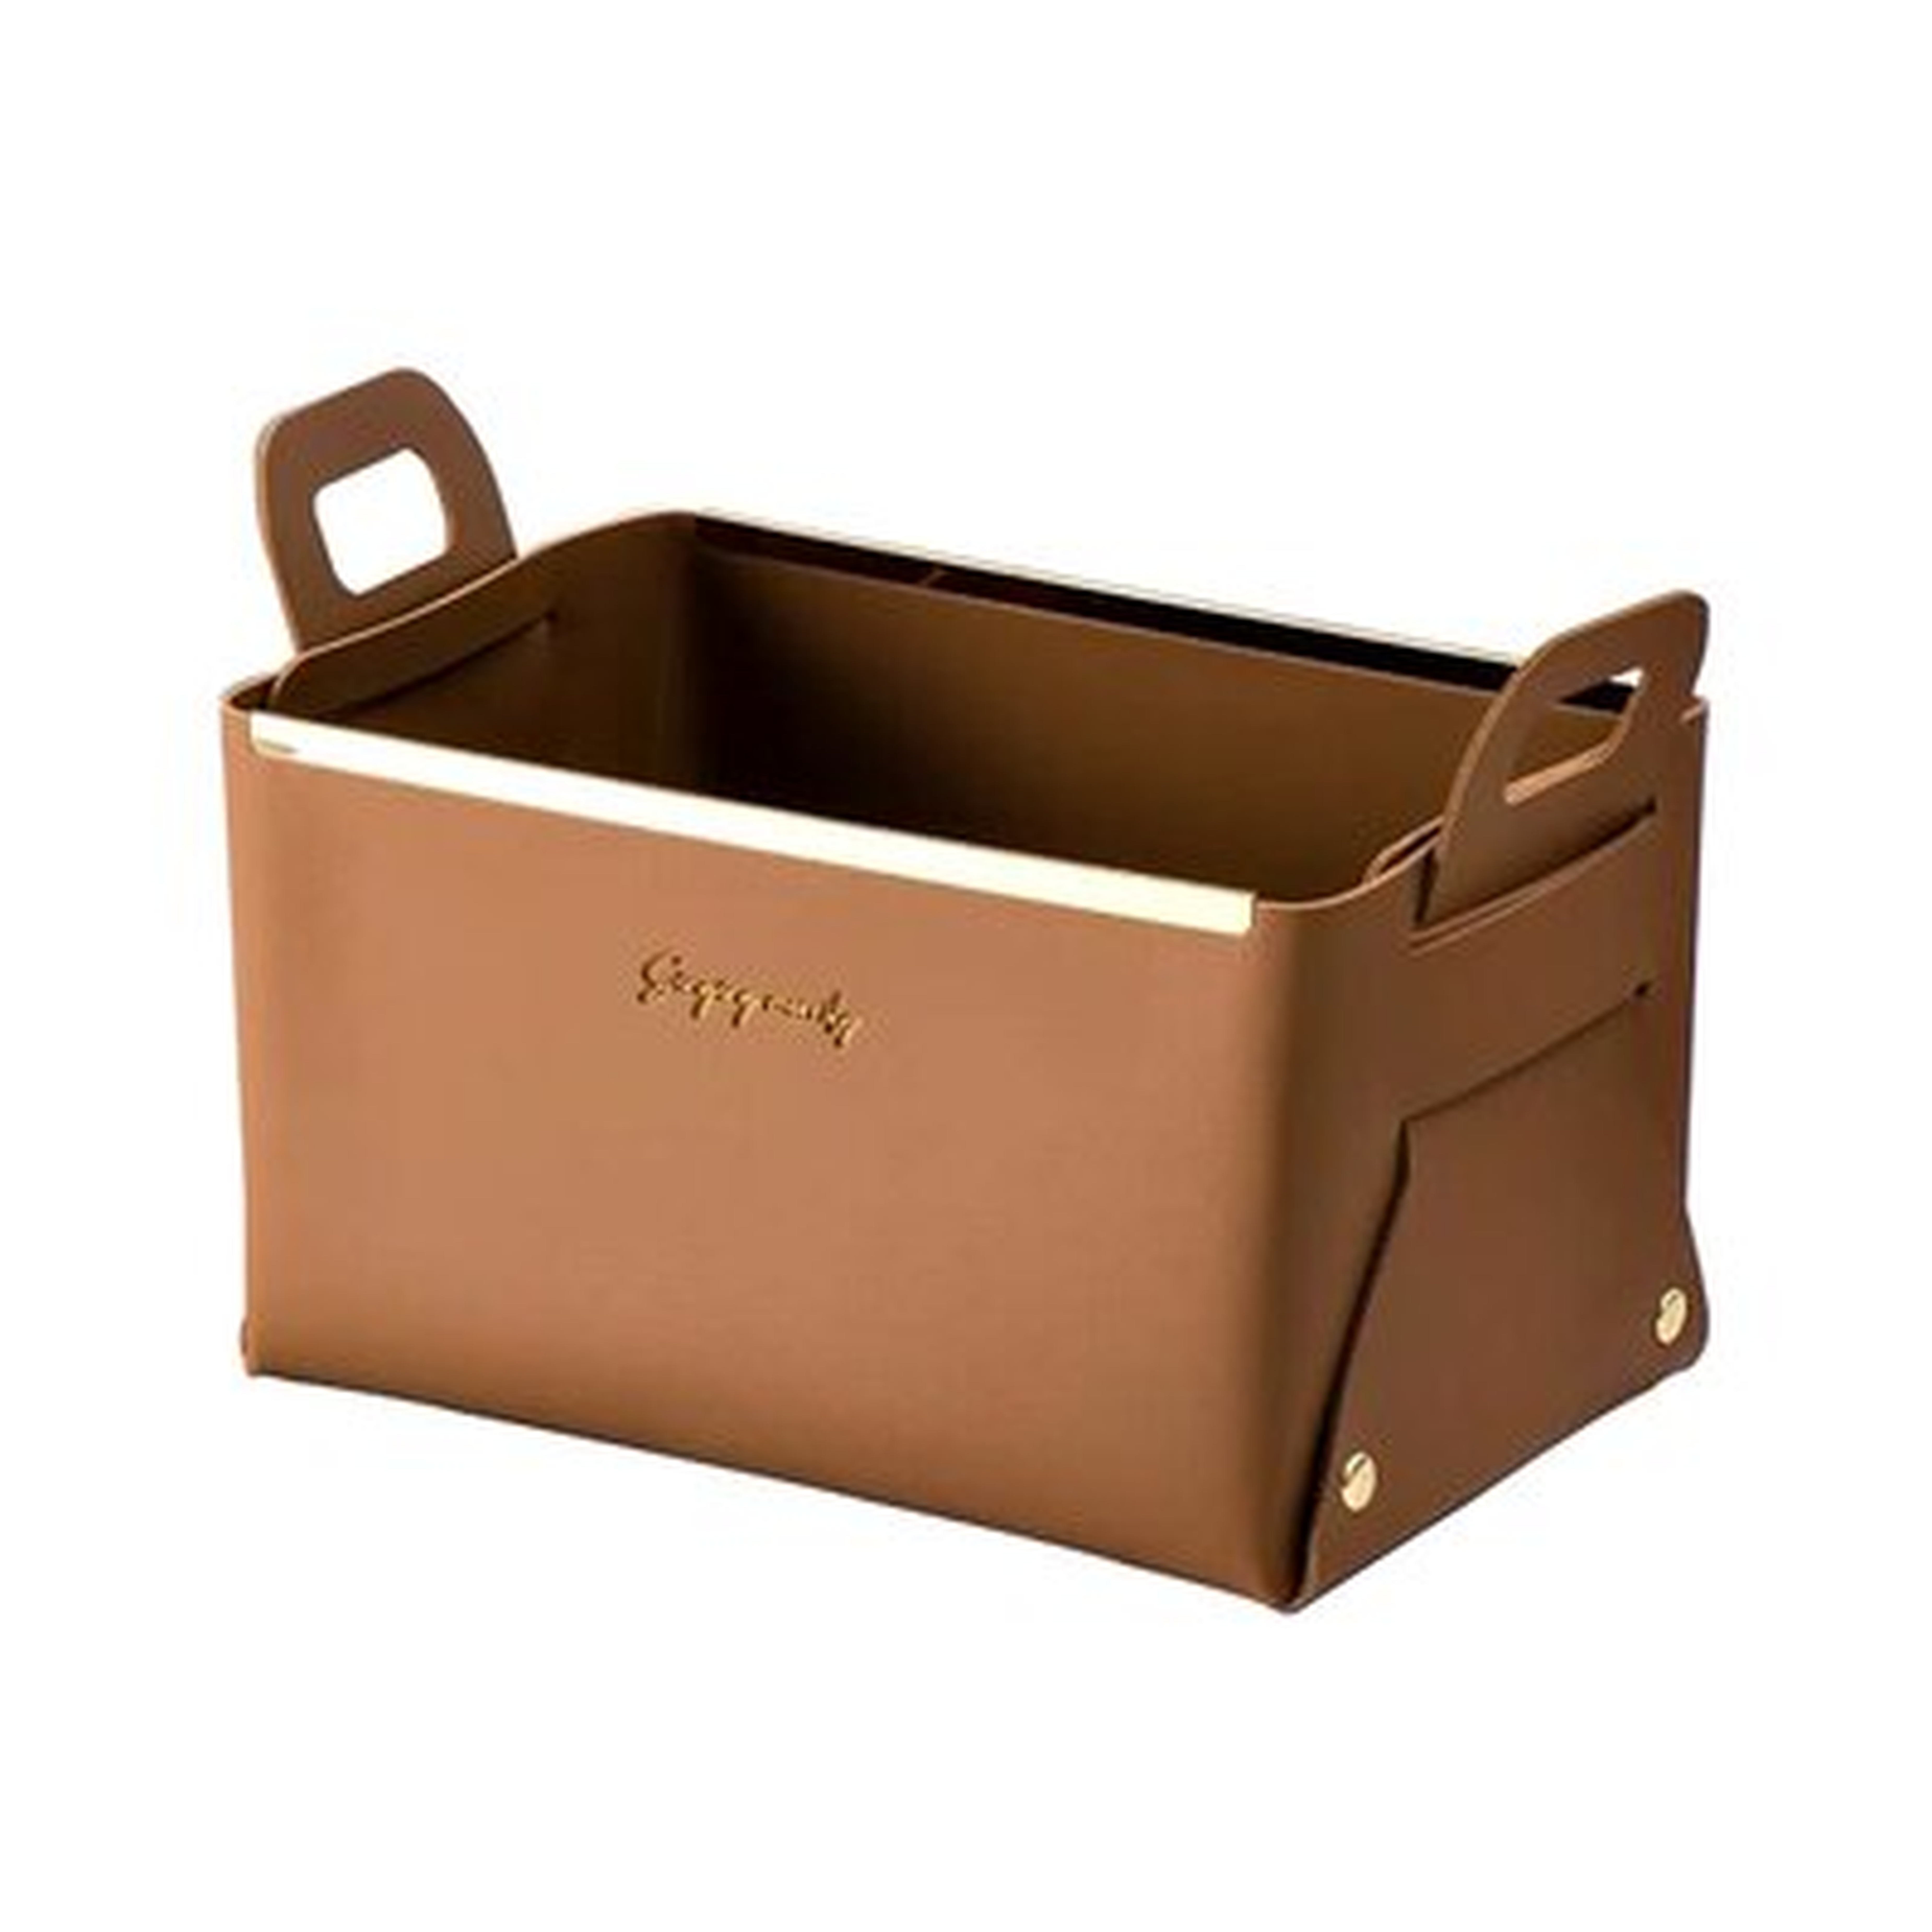 Foldable Leather Storage Bin With Handles,Small Cube Storage Open Storage Box Decorative Storage Basket For Organizing Cosmetics,Toys,Clothes,Food - Wayfair